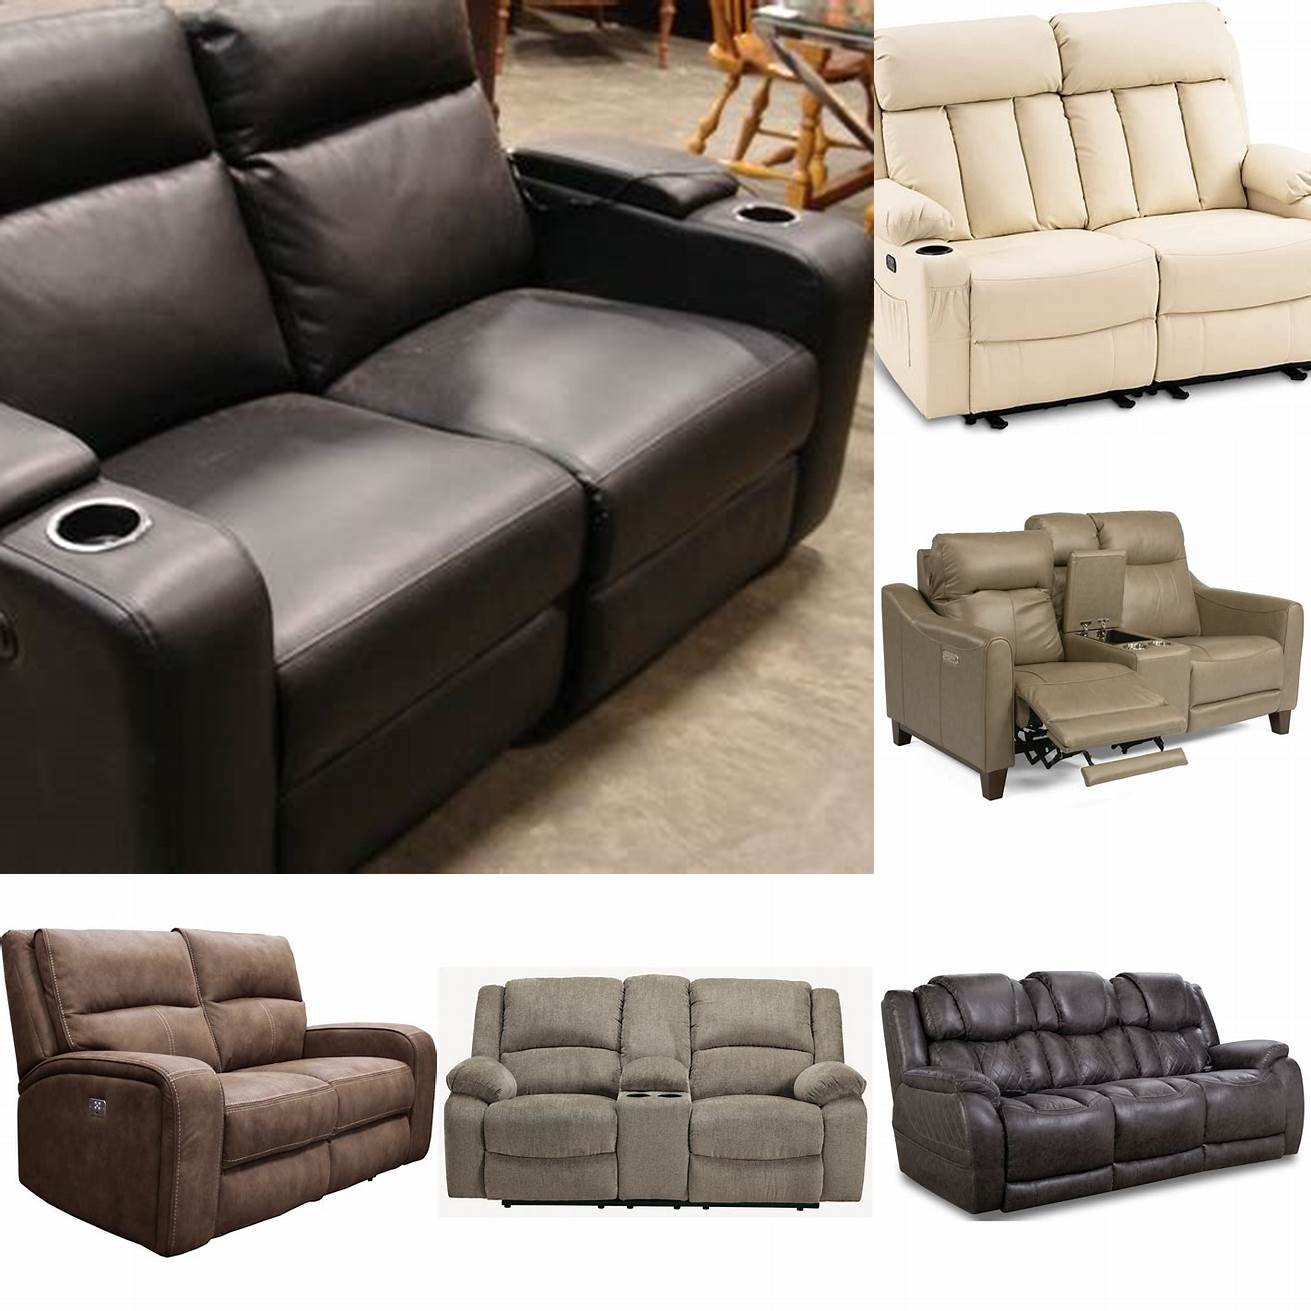 Electrically operated double recliner sofa